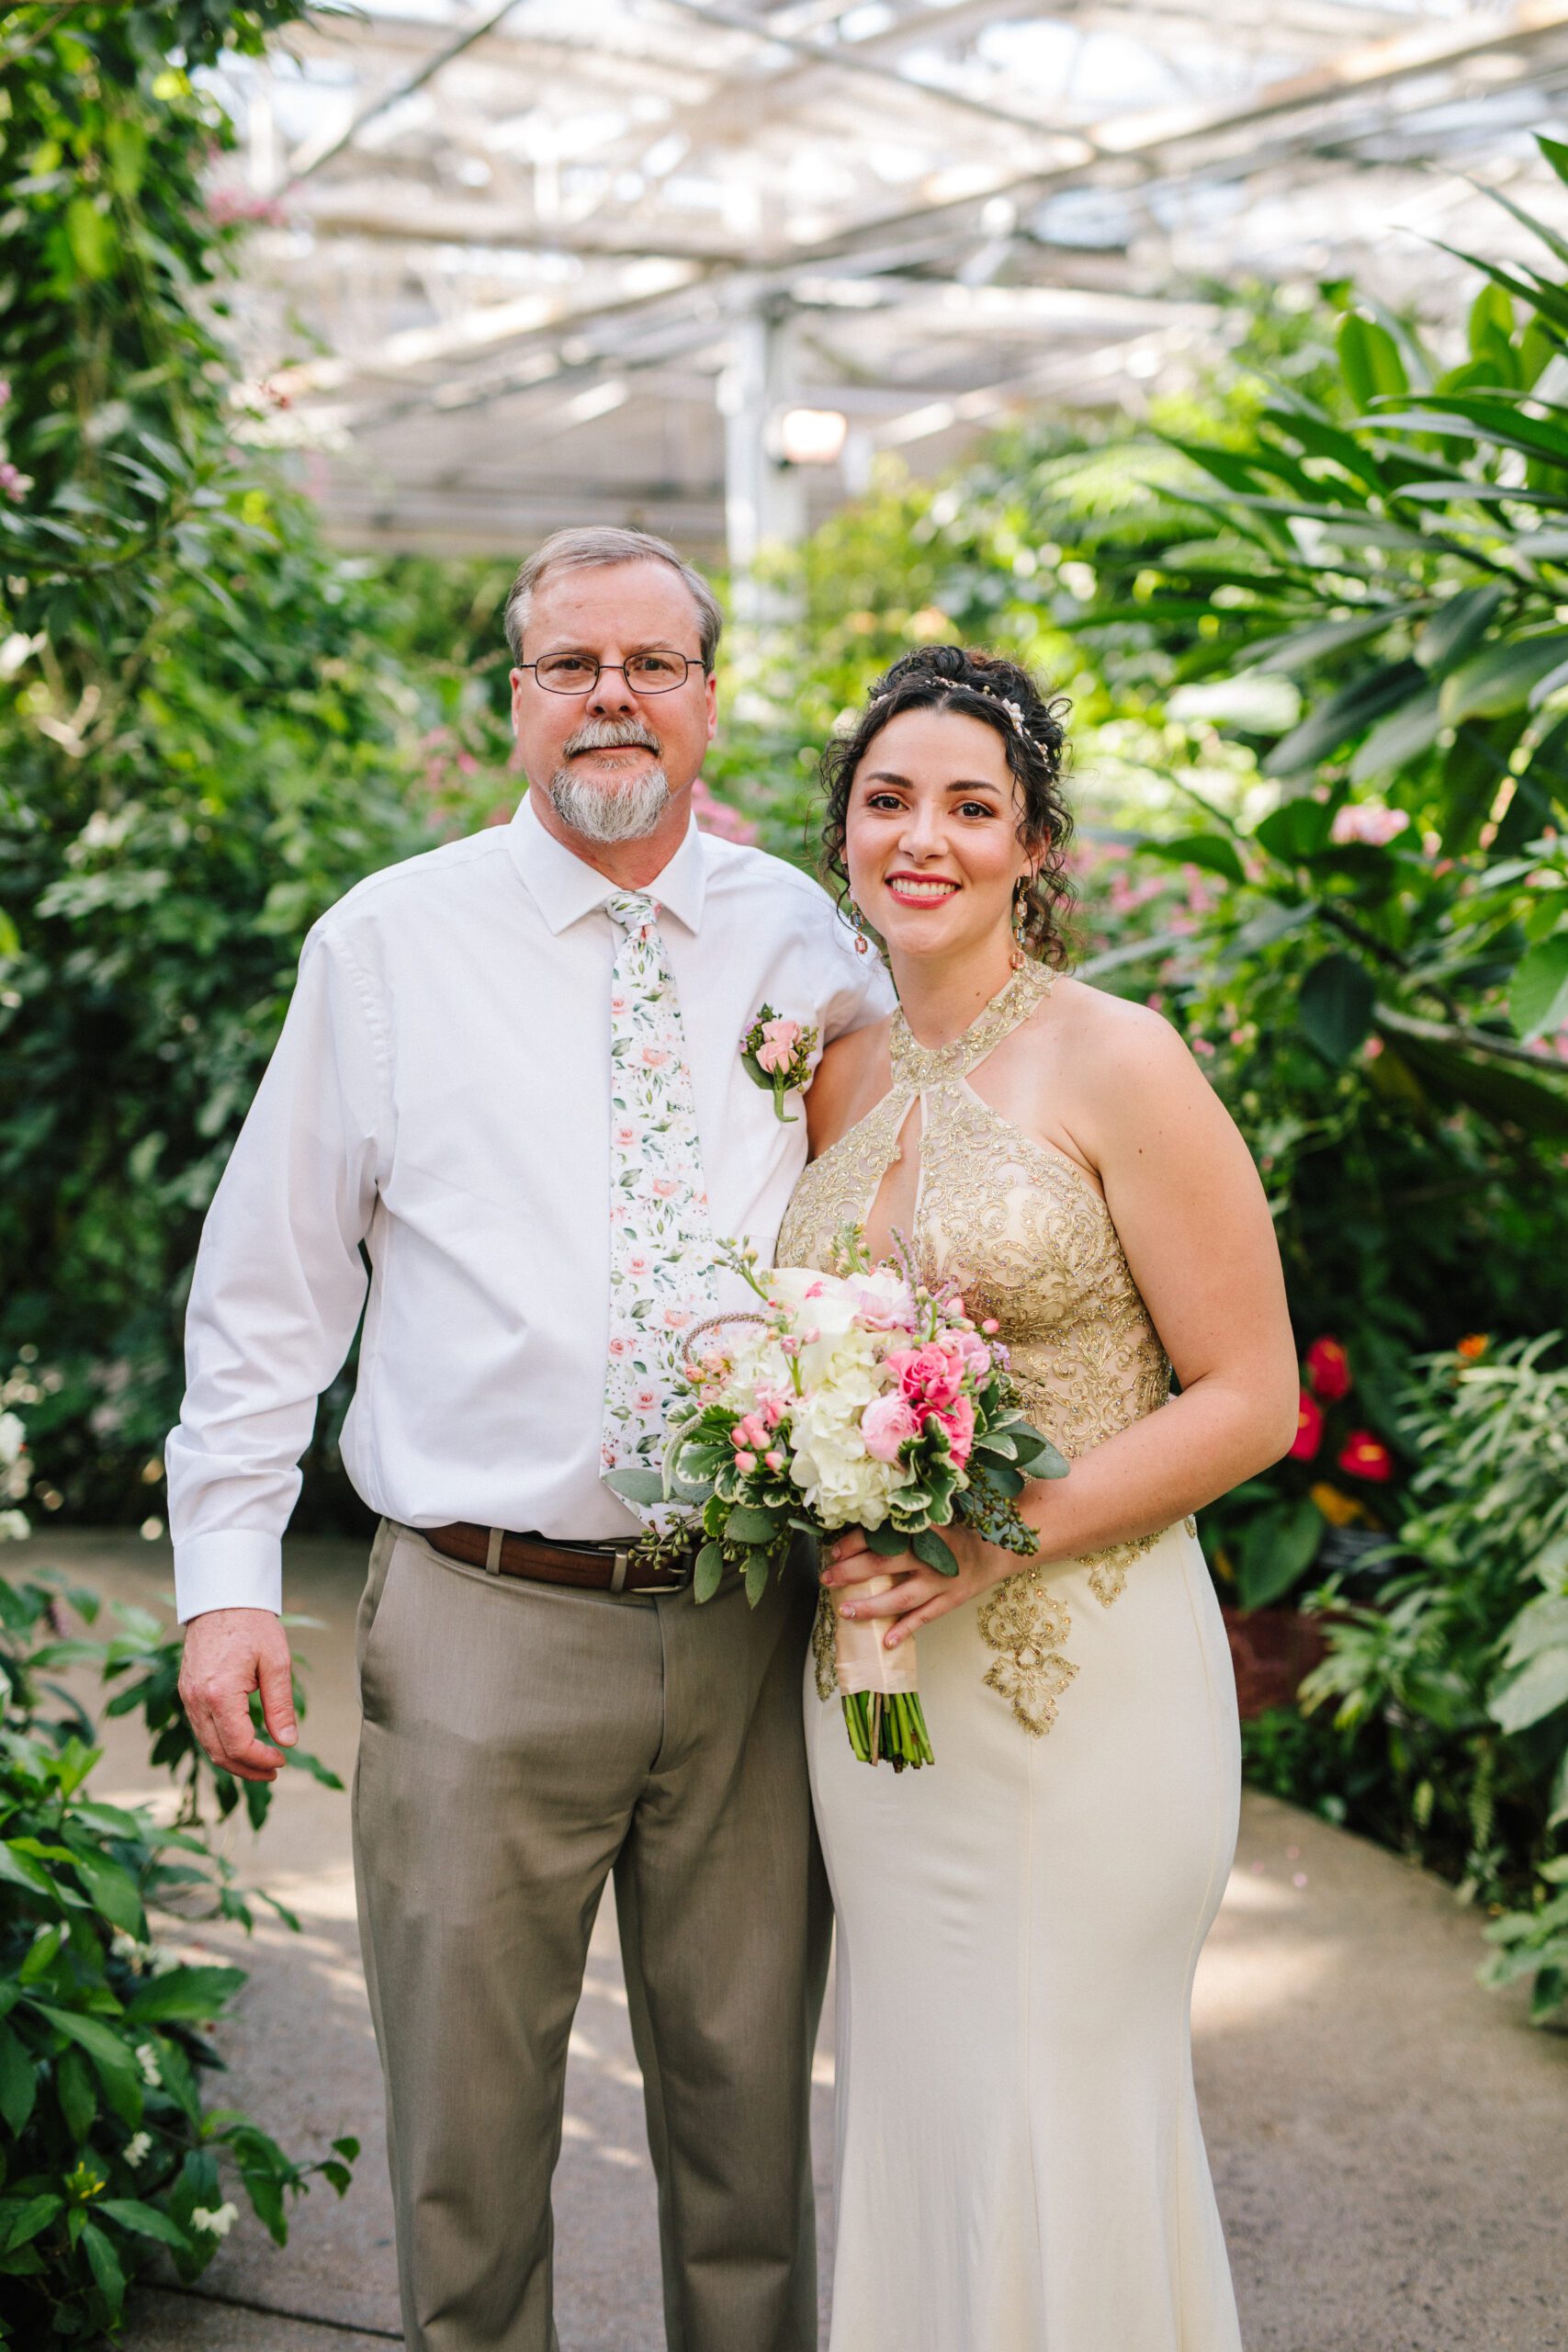 The bride and her father before walking down the aisle for her Butterfly Pavilion wedding.